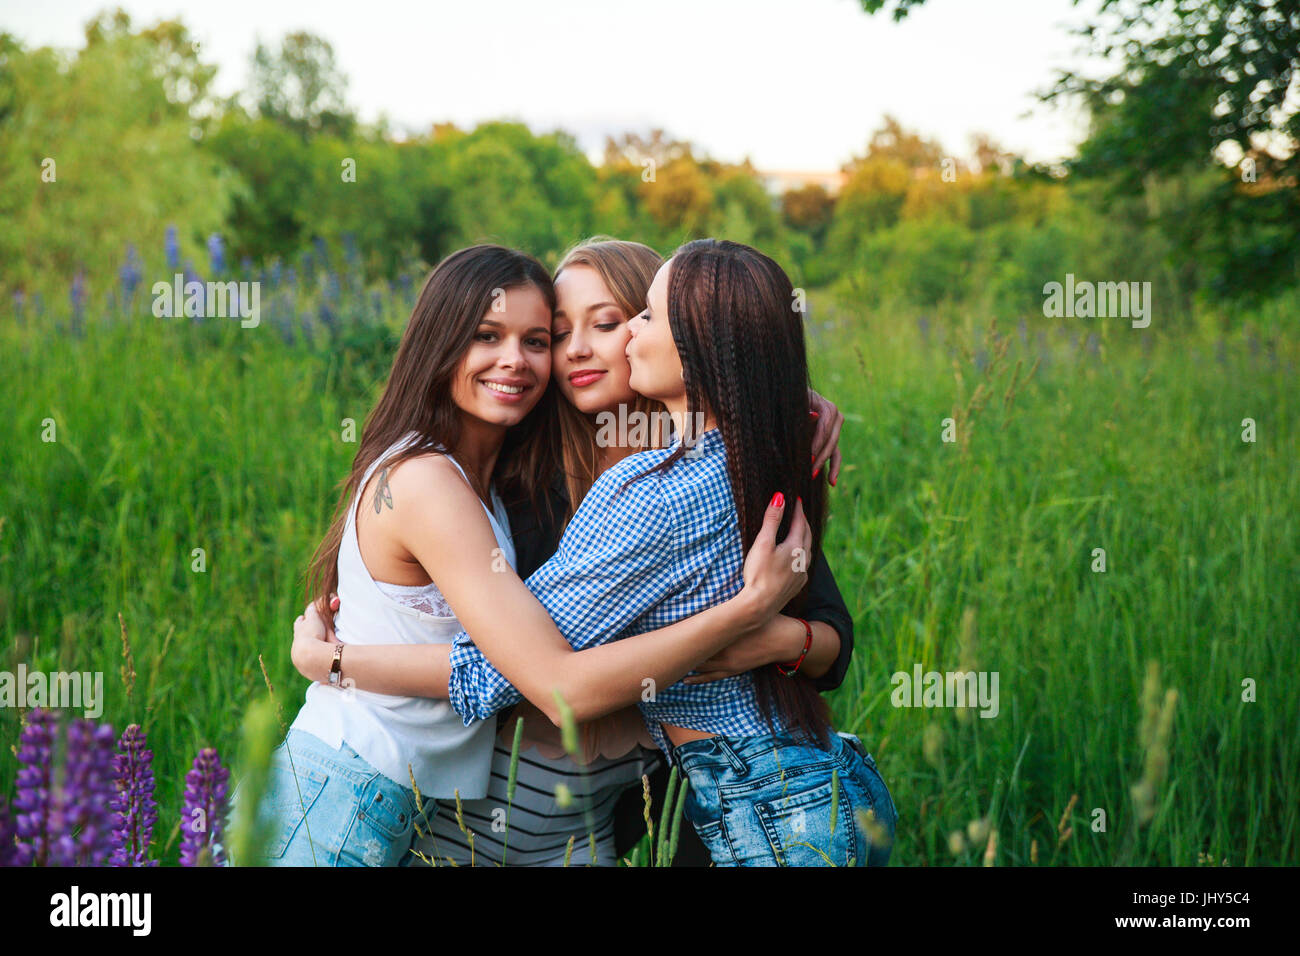 Girlfriends Friendship Happiness Community Concept. Three smiling friends hugging outdoors in the nature Stock Photo